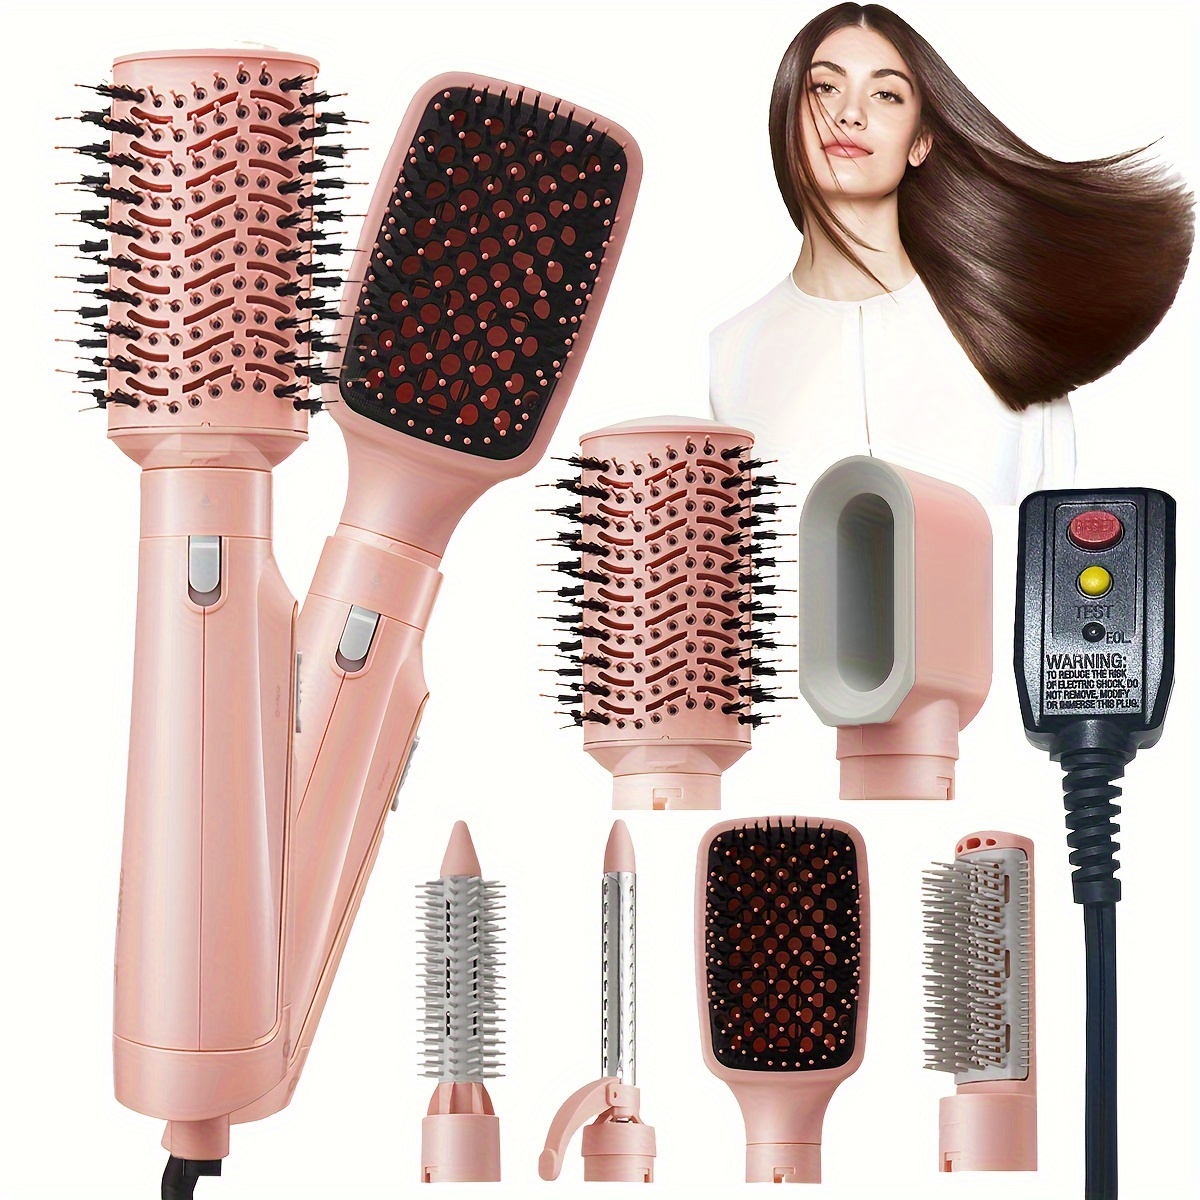 

6-in-1 Hot Air Brush Styler, Interchangeable Heads, Straight Hair Comb, Blower Attachment, All In 1 Hair Styler, Gifts For Women, Mother's Day Gift